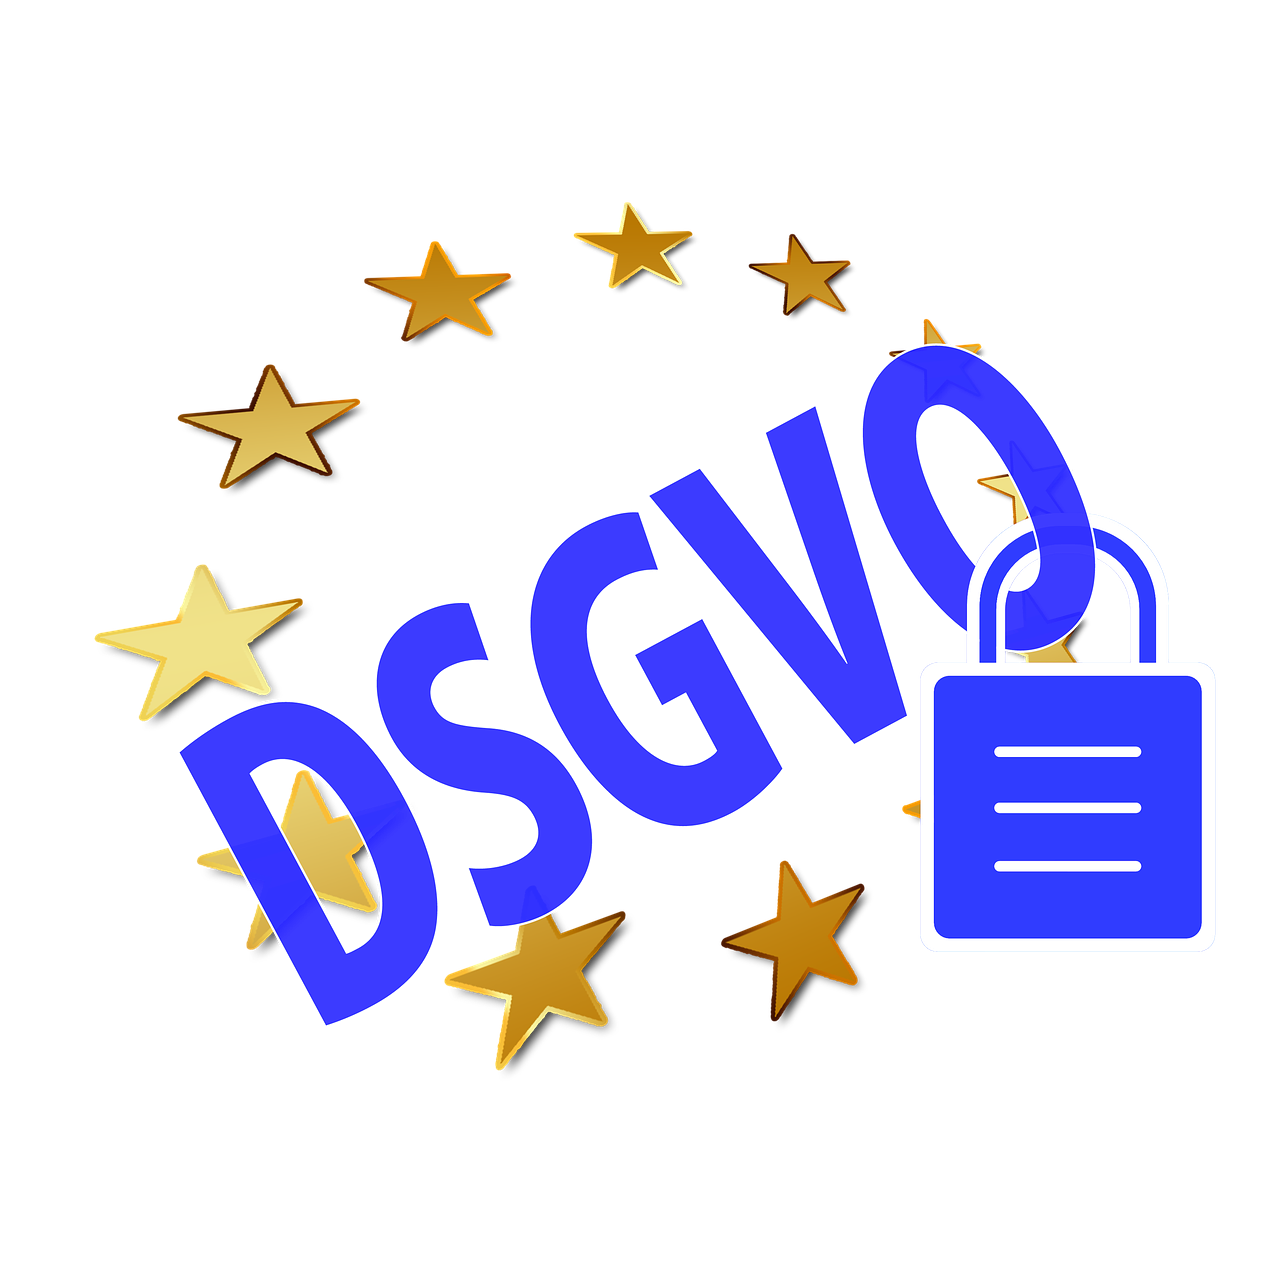 privacy policy  dsgvo  security free photo